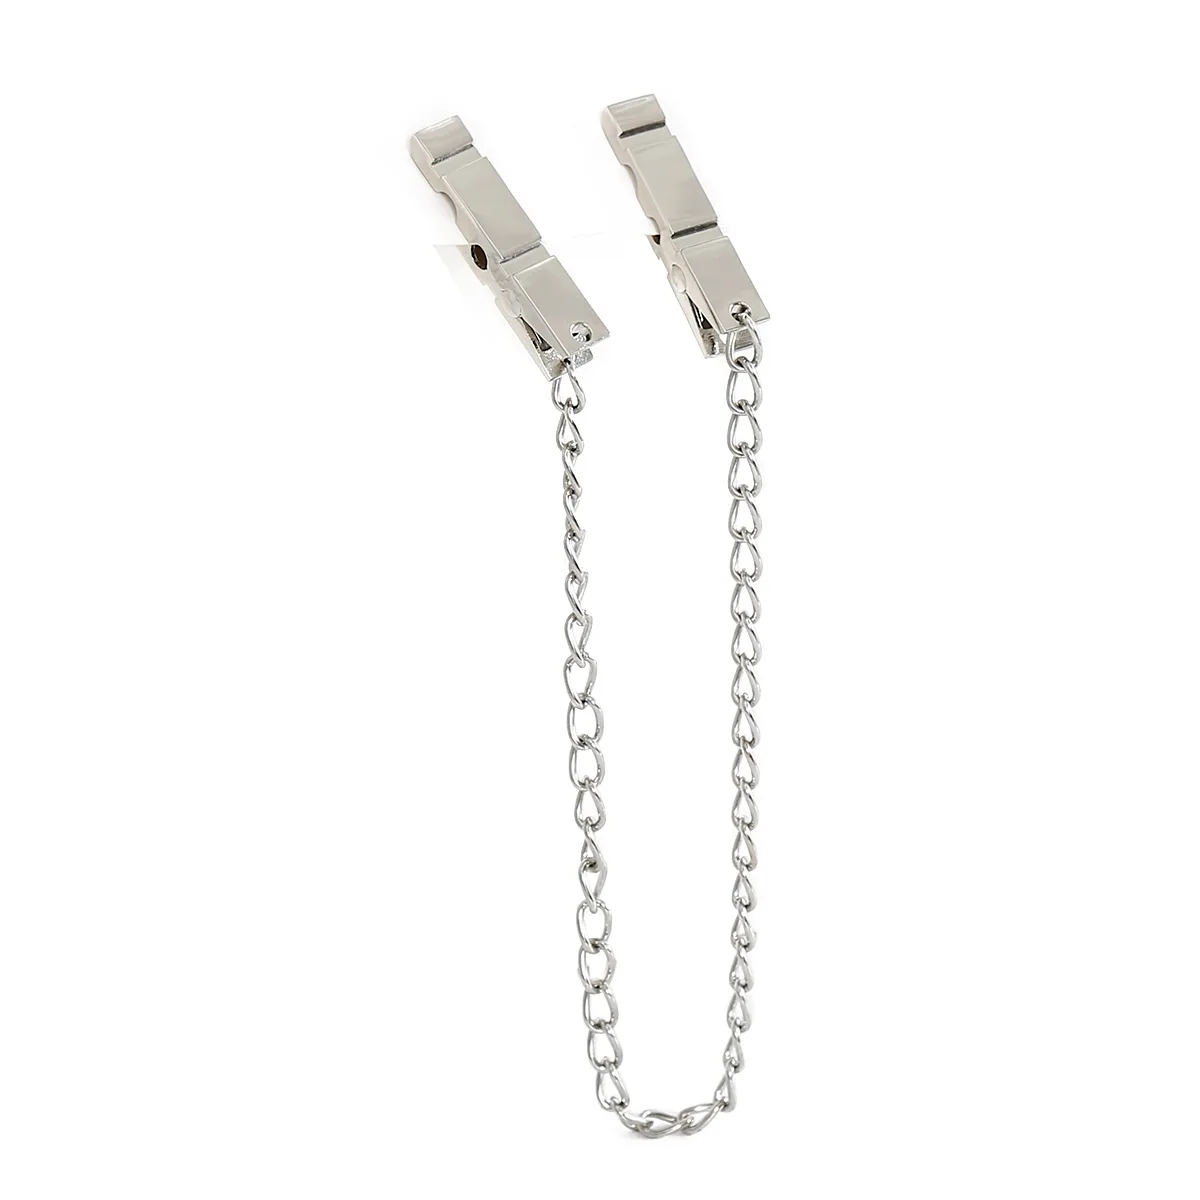 Modern-Zinc-Alloy-Nipple-Clamps-with-Chain-OPR-321143-2